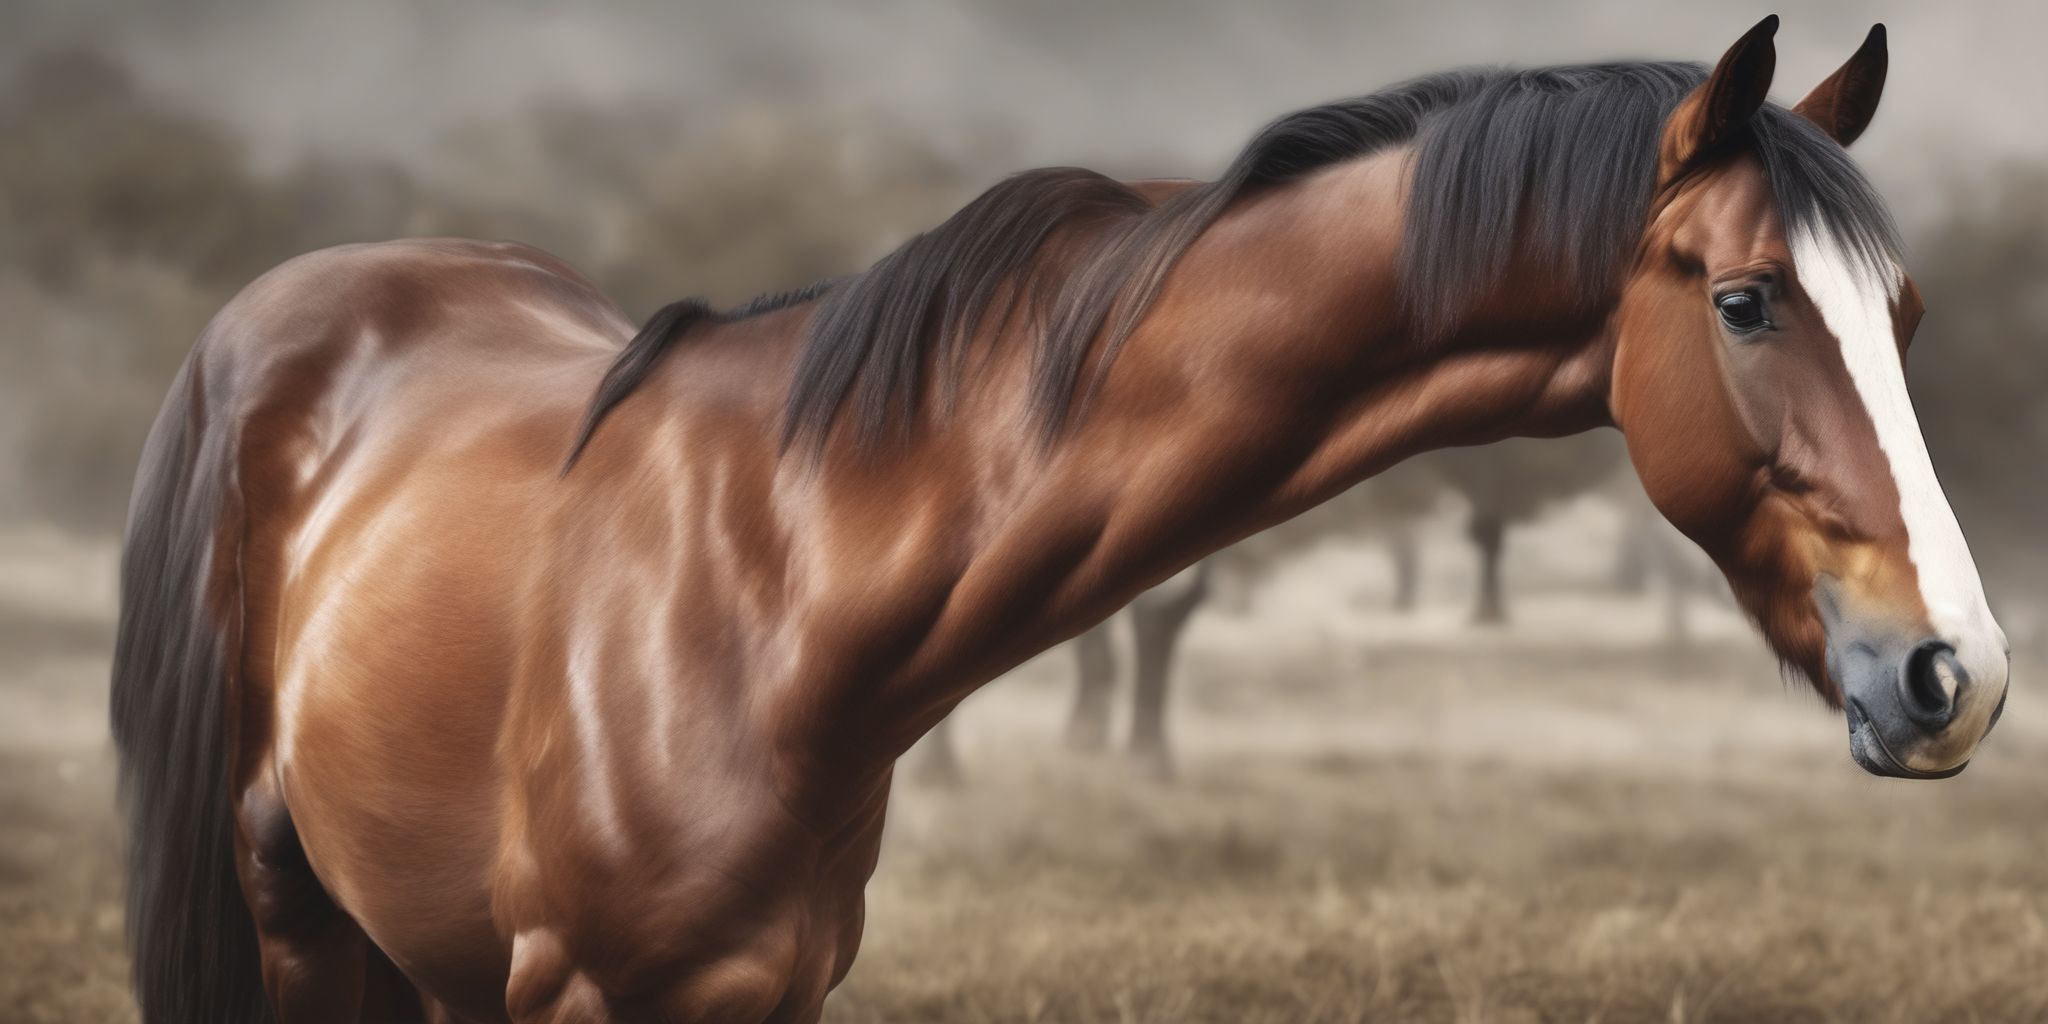 Horse  in realistic, photographic style